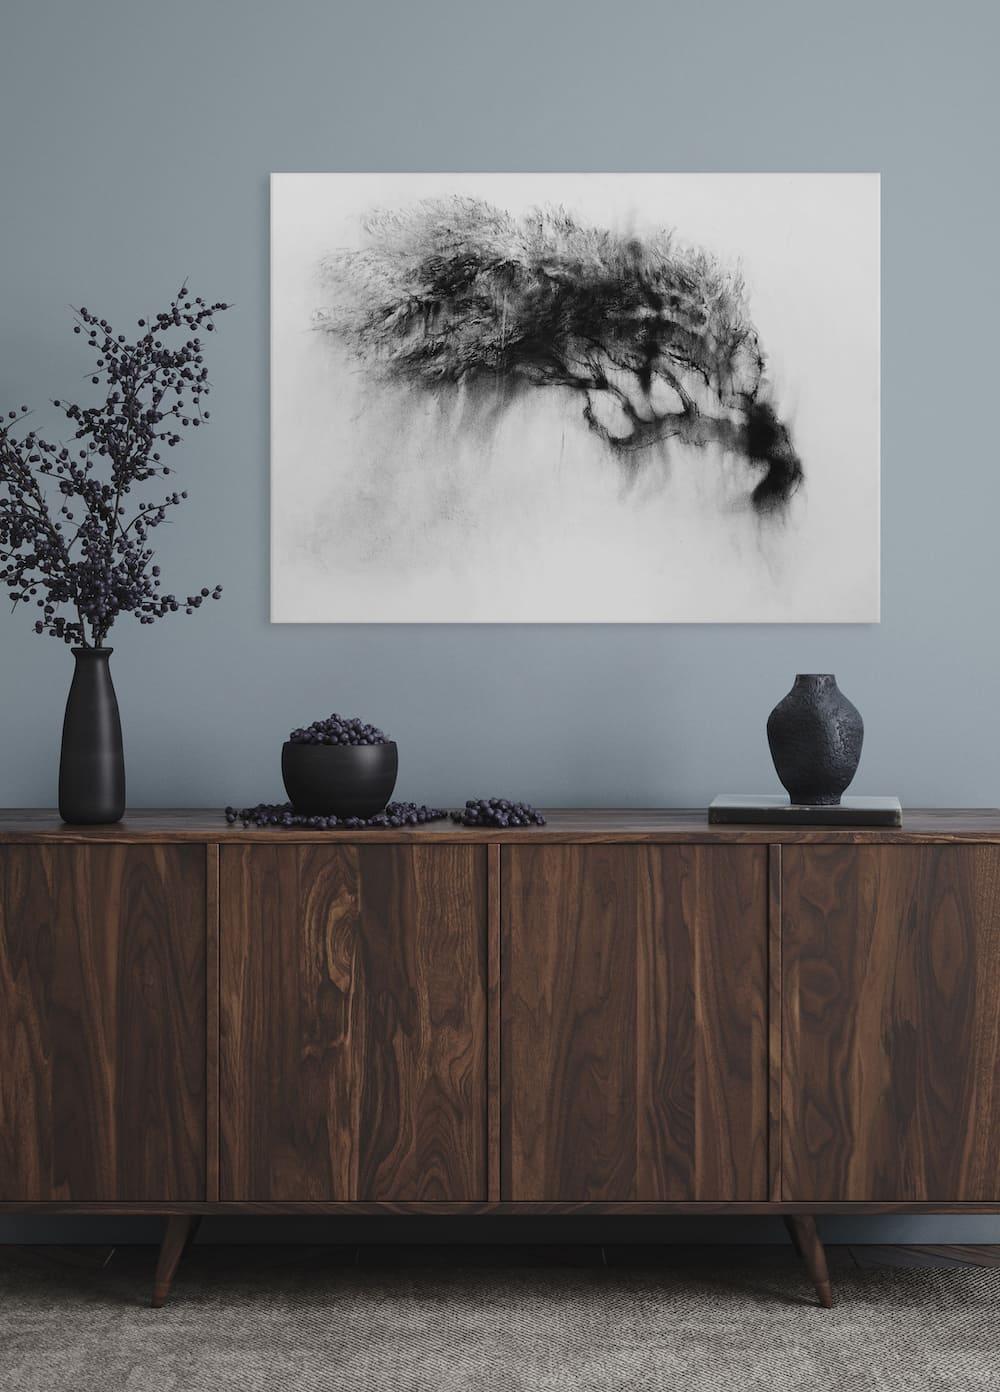 Tree in the wind is a unique black chalk on paper painting by contemporary artist Guy Oberson, dimensions are 59 × 79 cm (23.2 × 31.1 in). 
The artwork is signed, sold framed and comes with a certificate of authenticity. 

This artwork depicts a